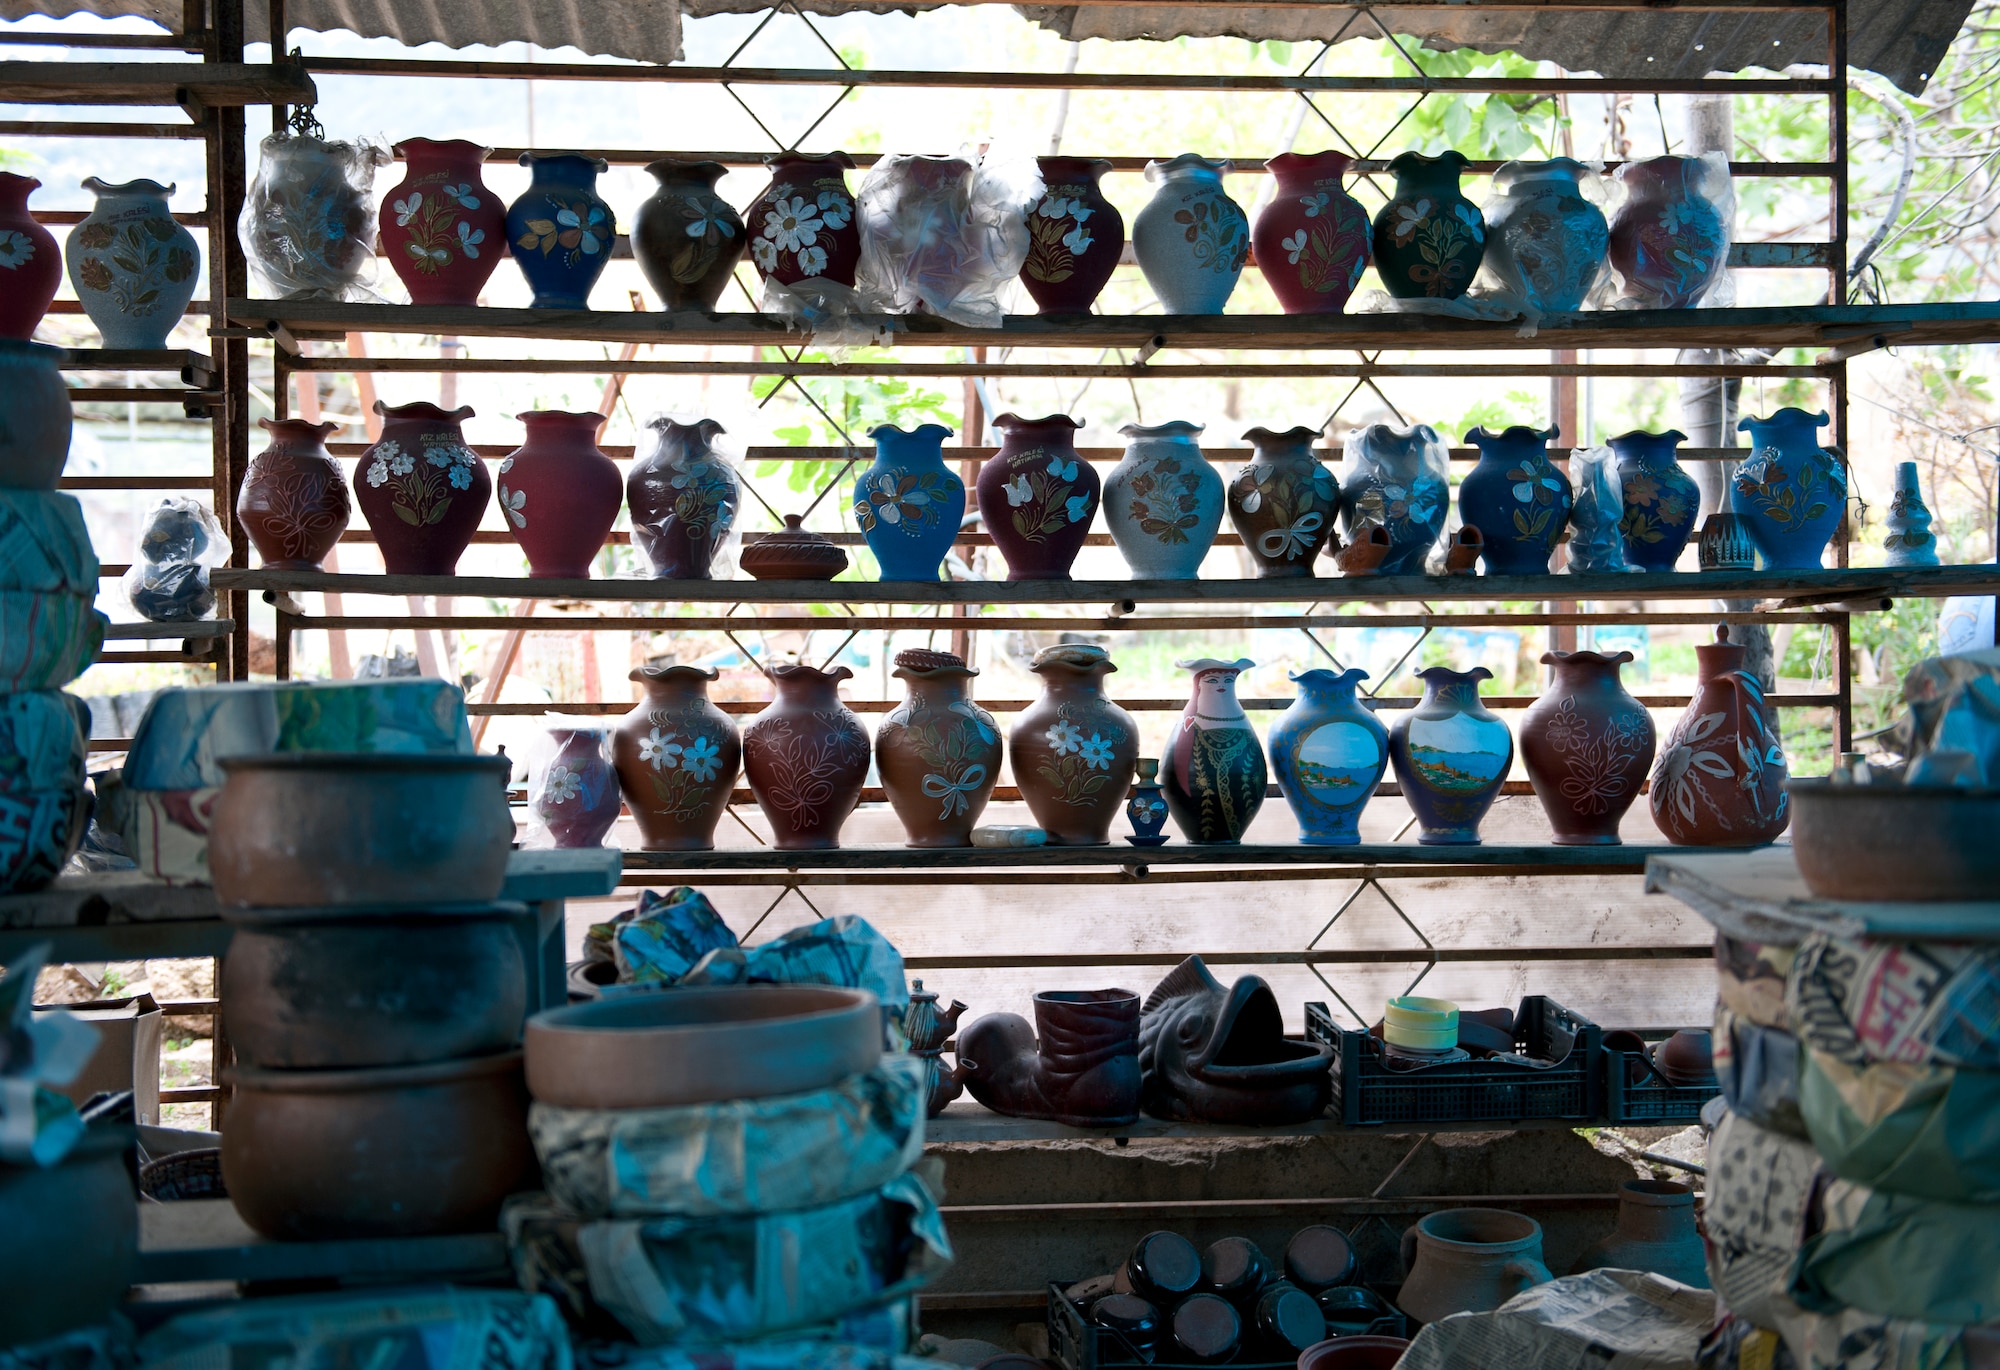 Clay pots sit on a shelf at a small open-air store along the road in the Mersin Province March 31, 2013, in Turkey. The small store was a point of interest along the route to Mut as one of Outdoor Recreation’s offered destinations. (U.S. Air Force photo by Senior Airman Daniel Phelps)